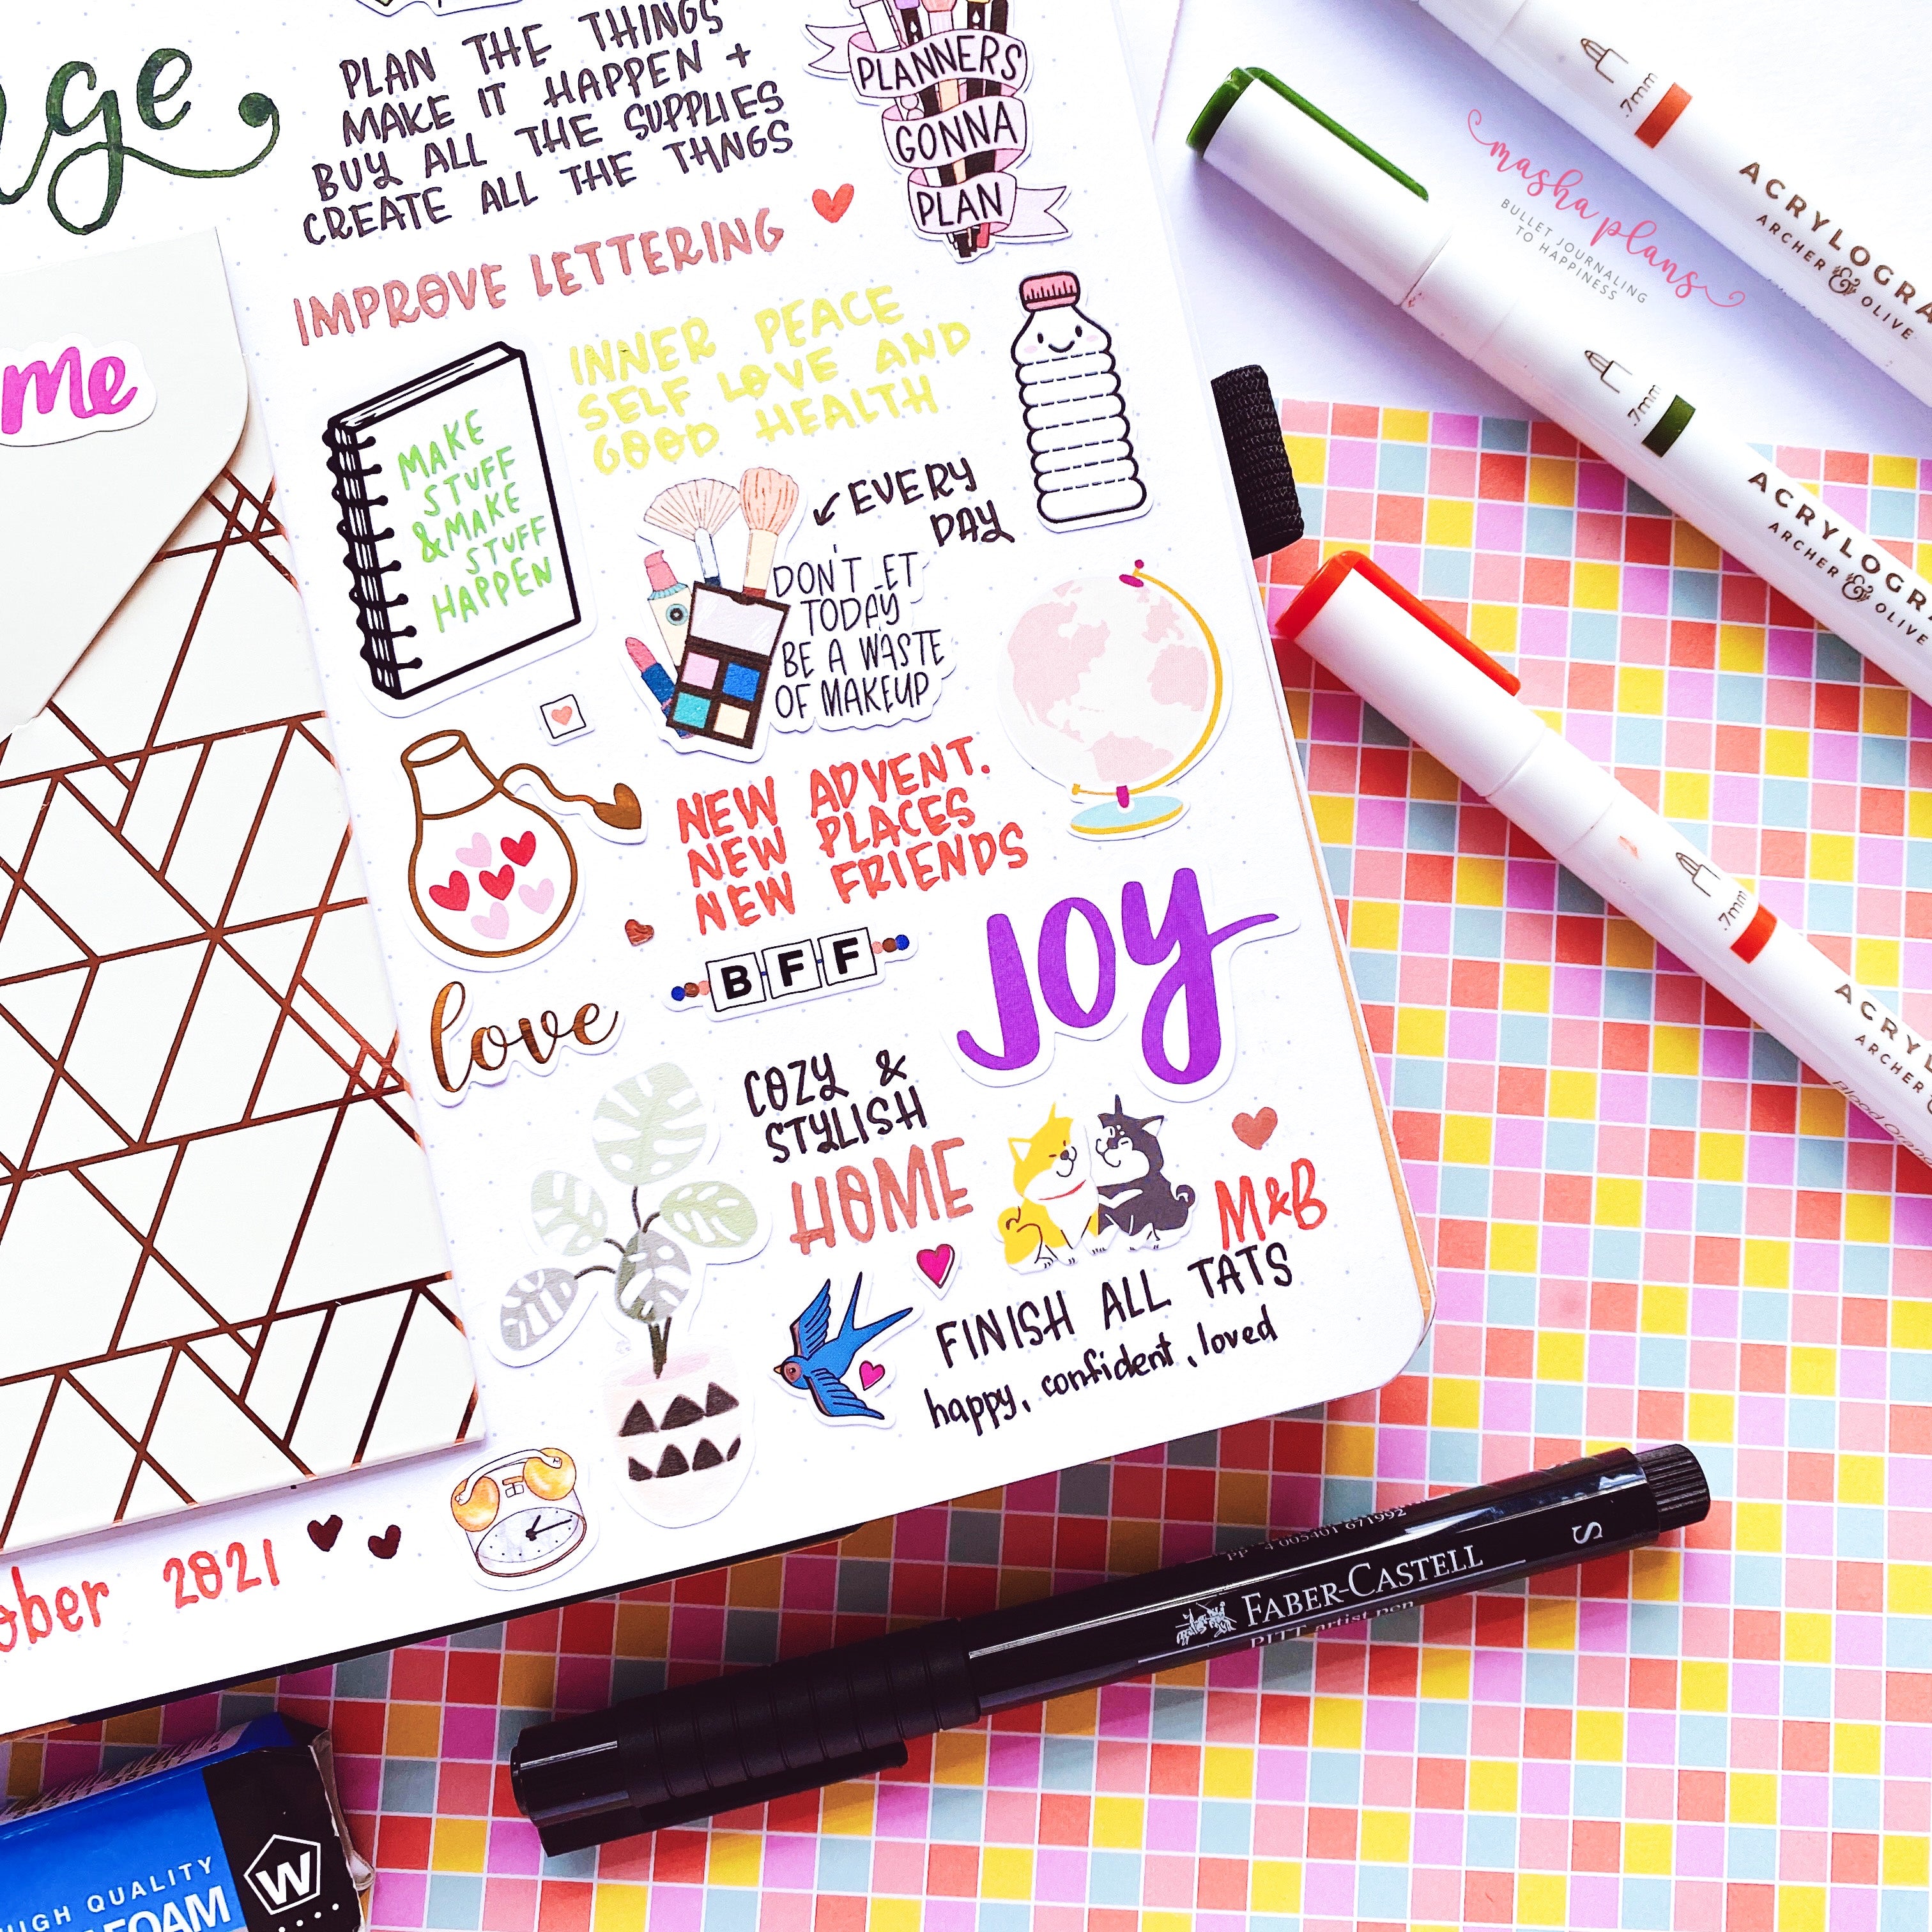 Steps to Take After Creating Your Vision Board or Journal — Your